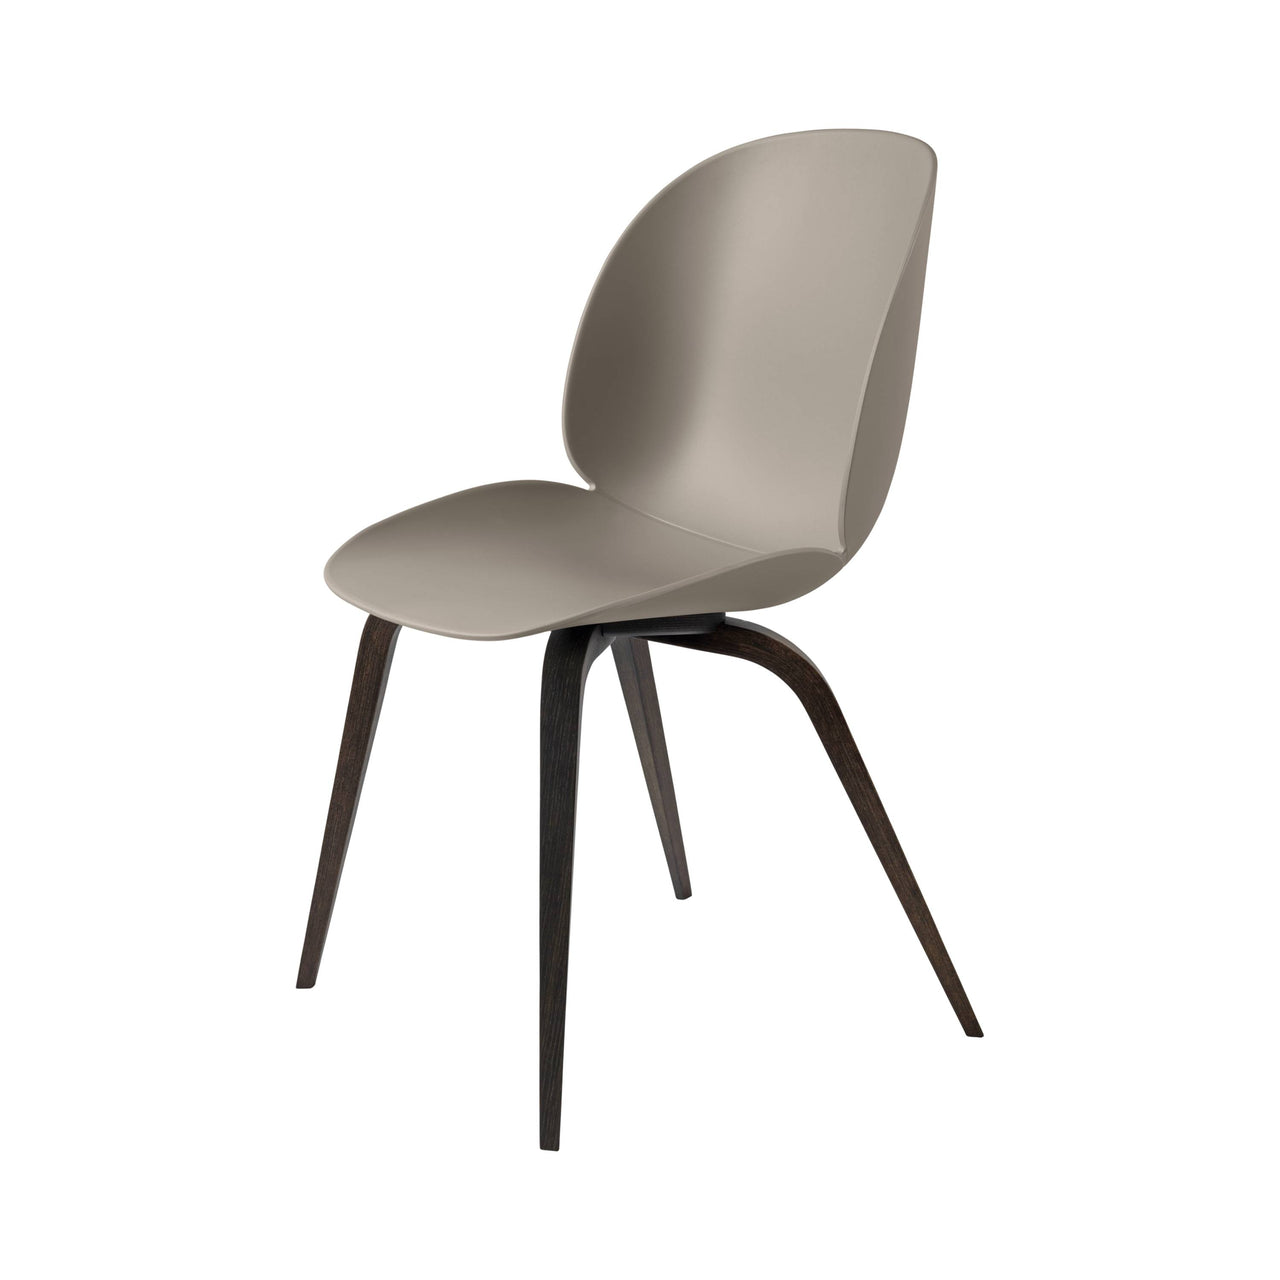 Beetle Dining Chair: Wood Base + New Beige + Smoked Oak + Plastic Glides